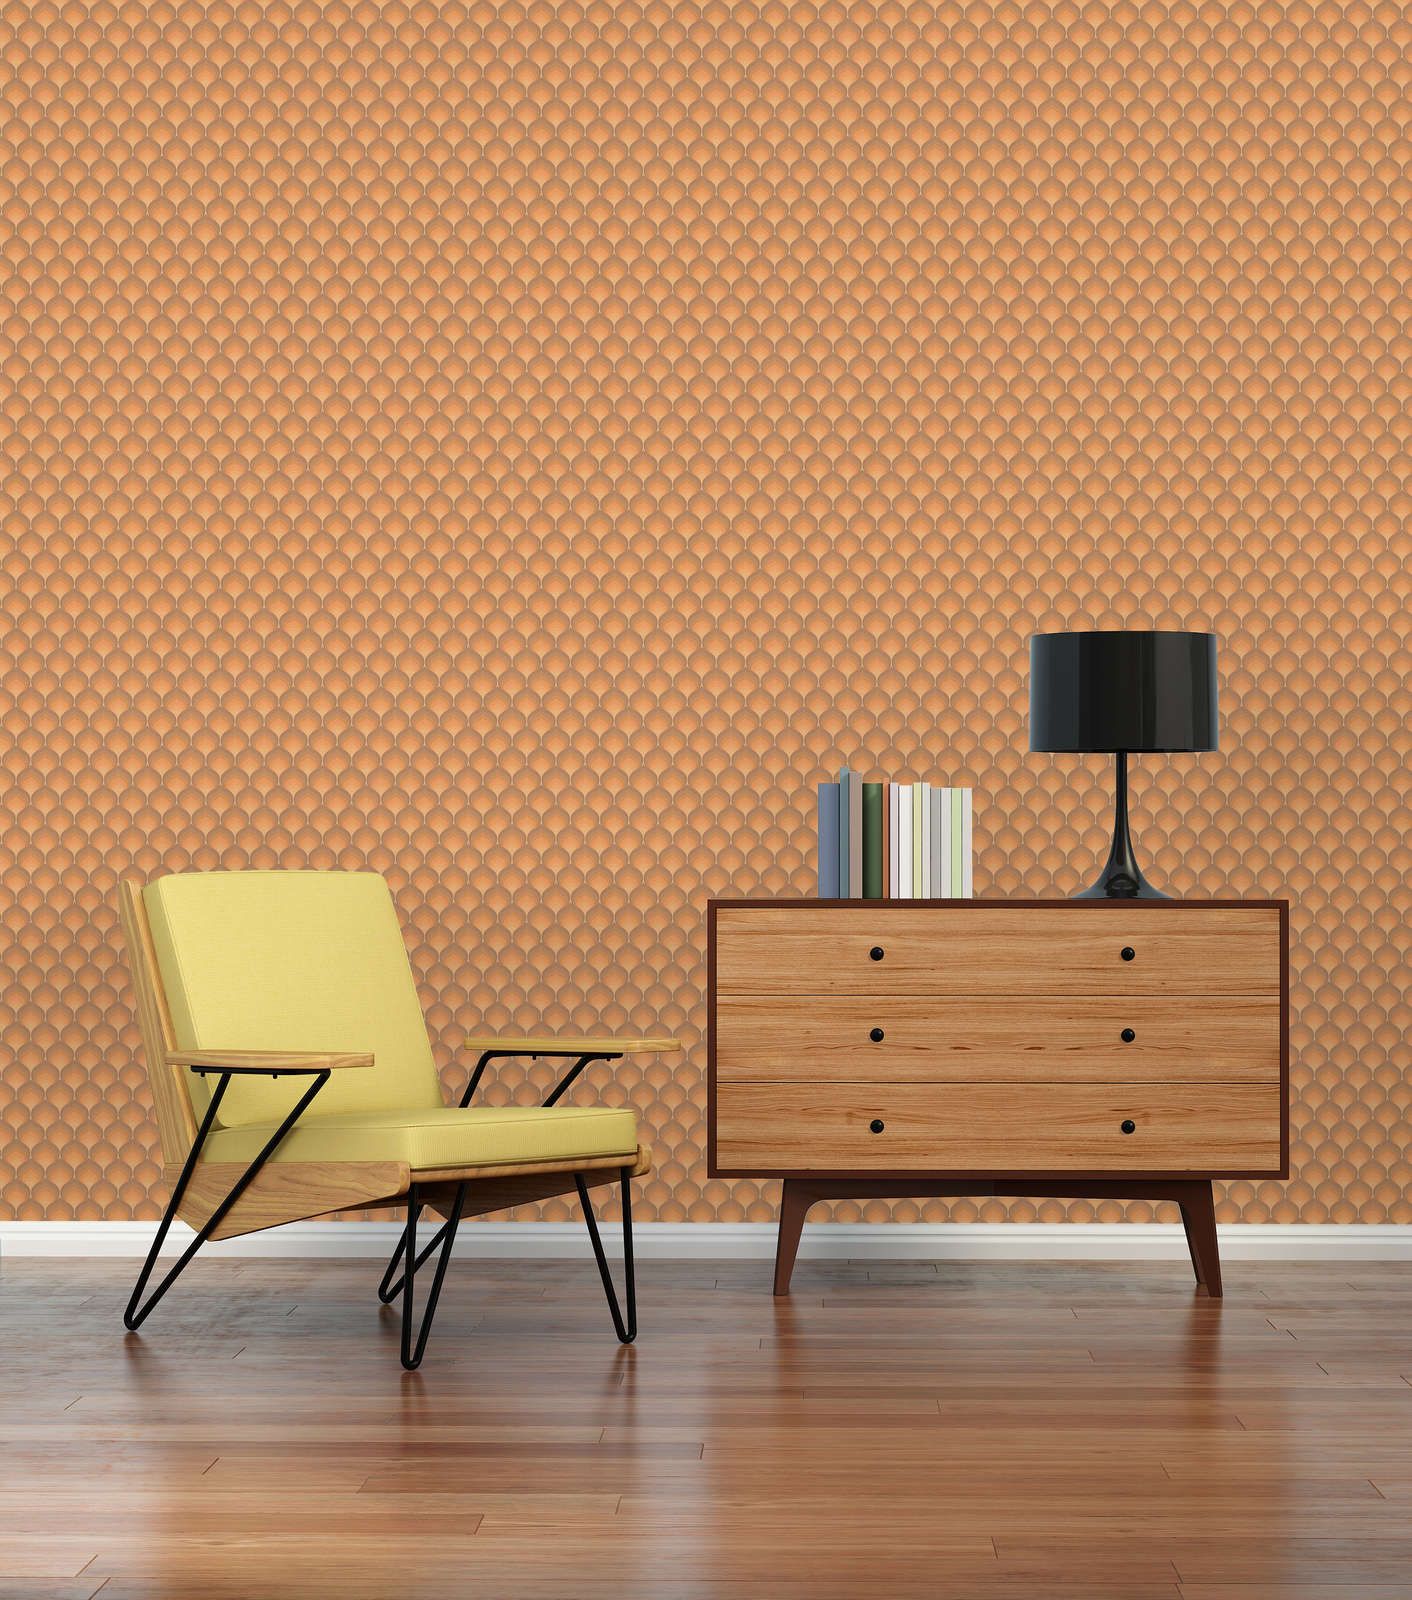             Retro wallpaper with textured scale pattern - brown, yellow, orange
        